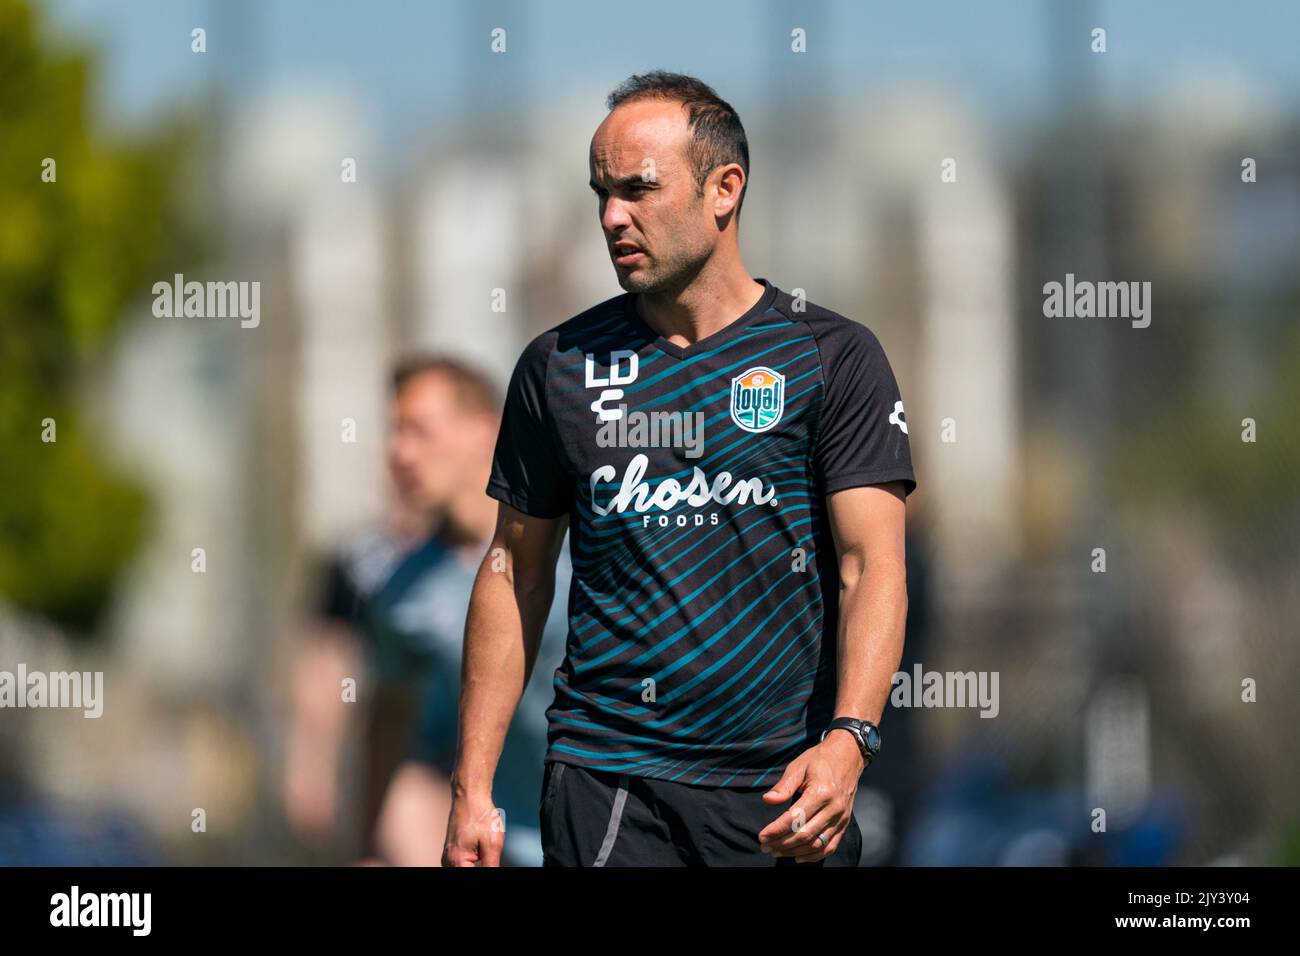 Landon Donovan, manager of the San Diego Loyal, in the middle of training Stock Photo